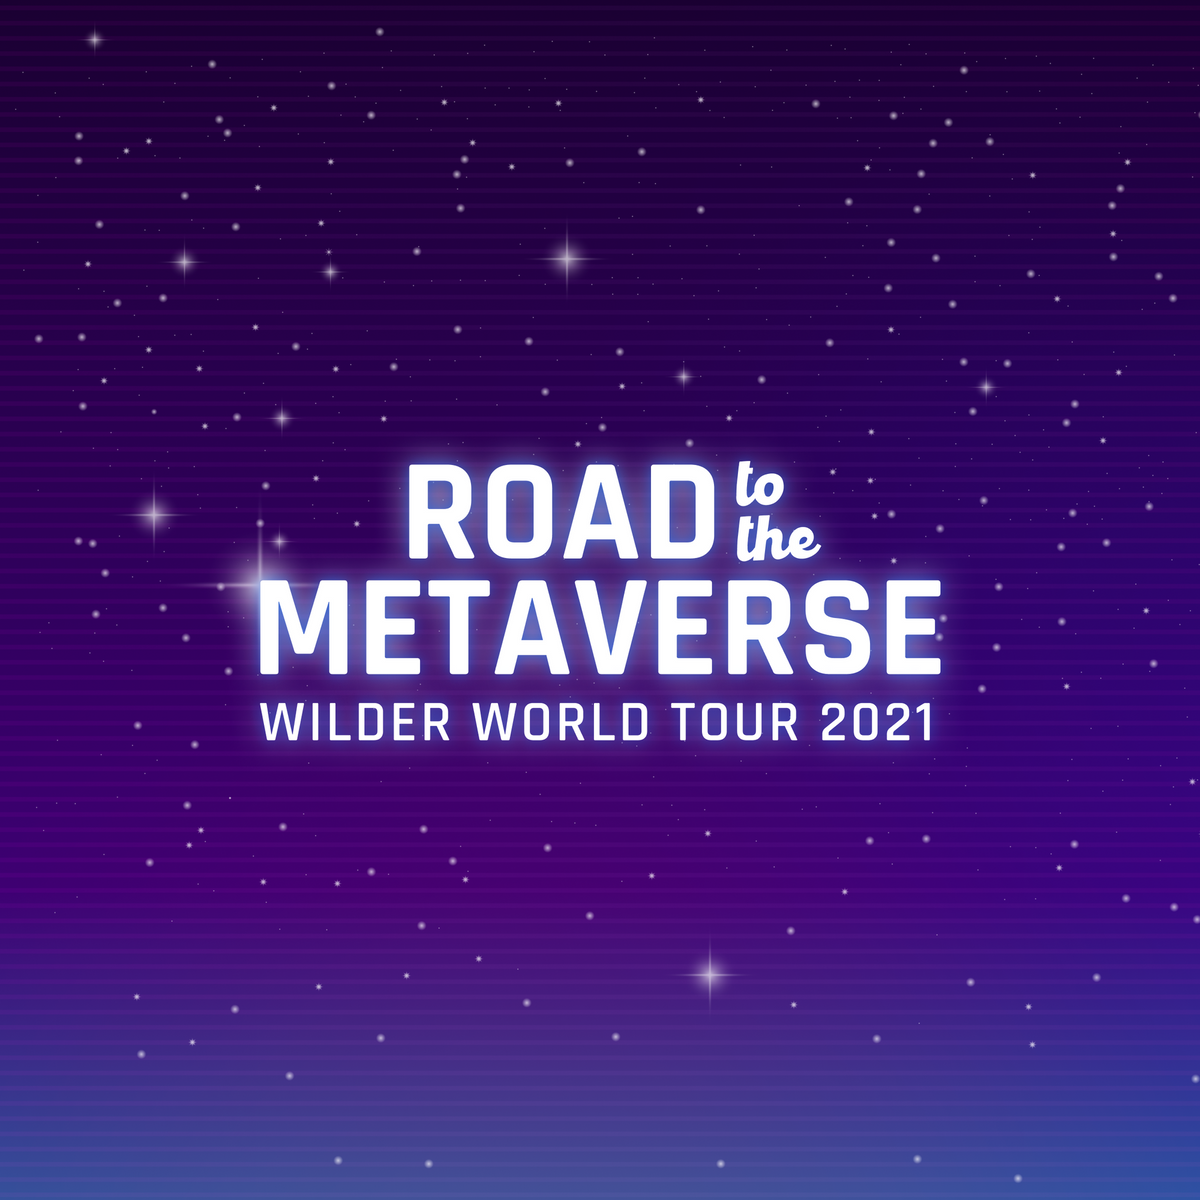 Welcome to the Wilder World Tour 2021 - The Road To The Metaverse